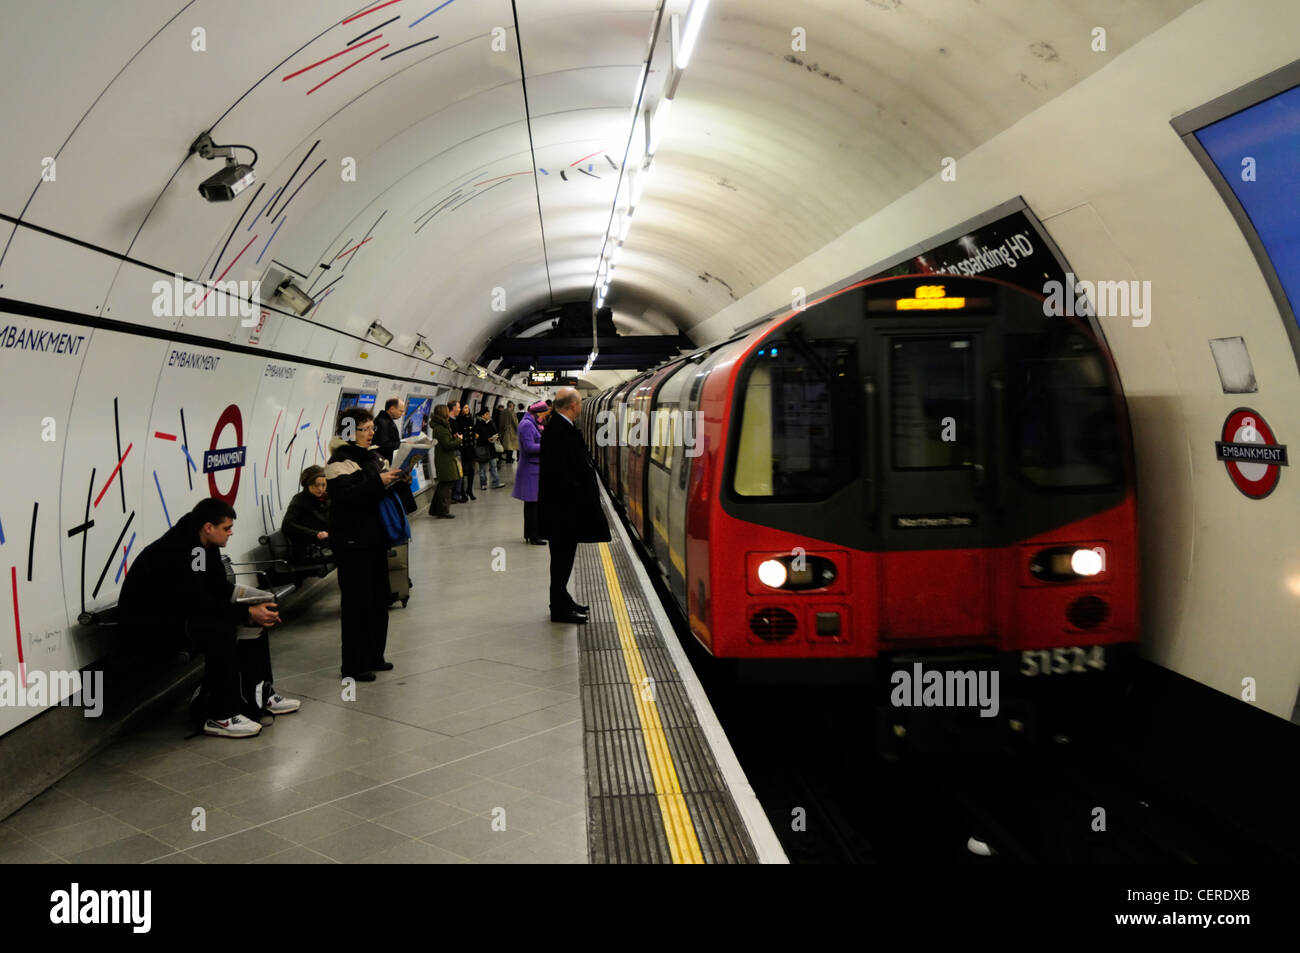 A Northern line tube train arriving at Embankment Underground station. Stock Photo